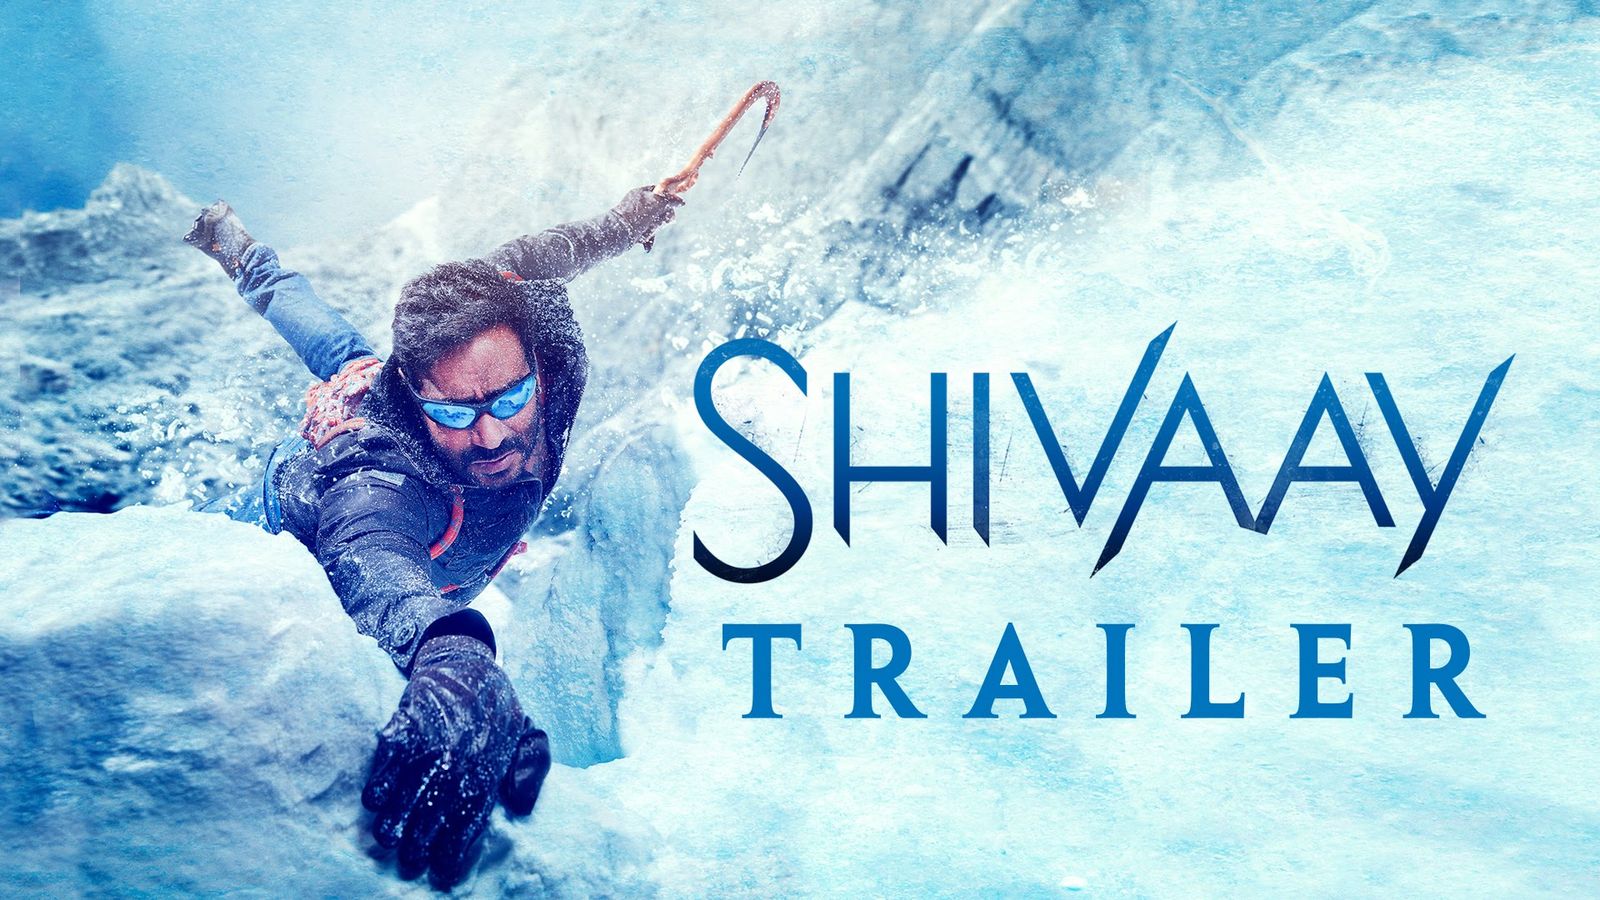 At almost 4 Minutes, Shivaay’s Breathtaking Trailer Will Transport You To A Different World!